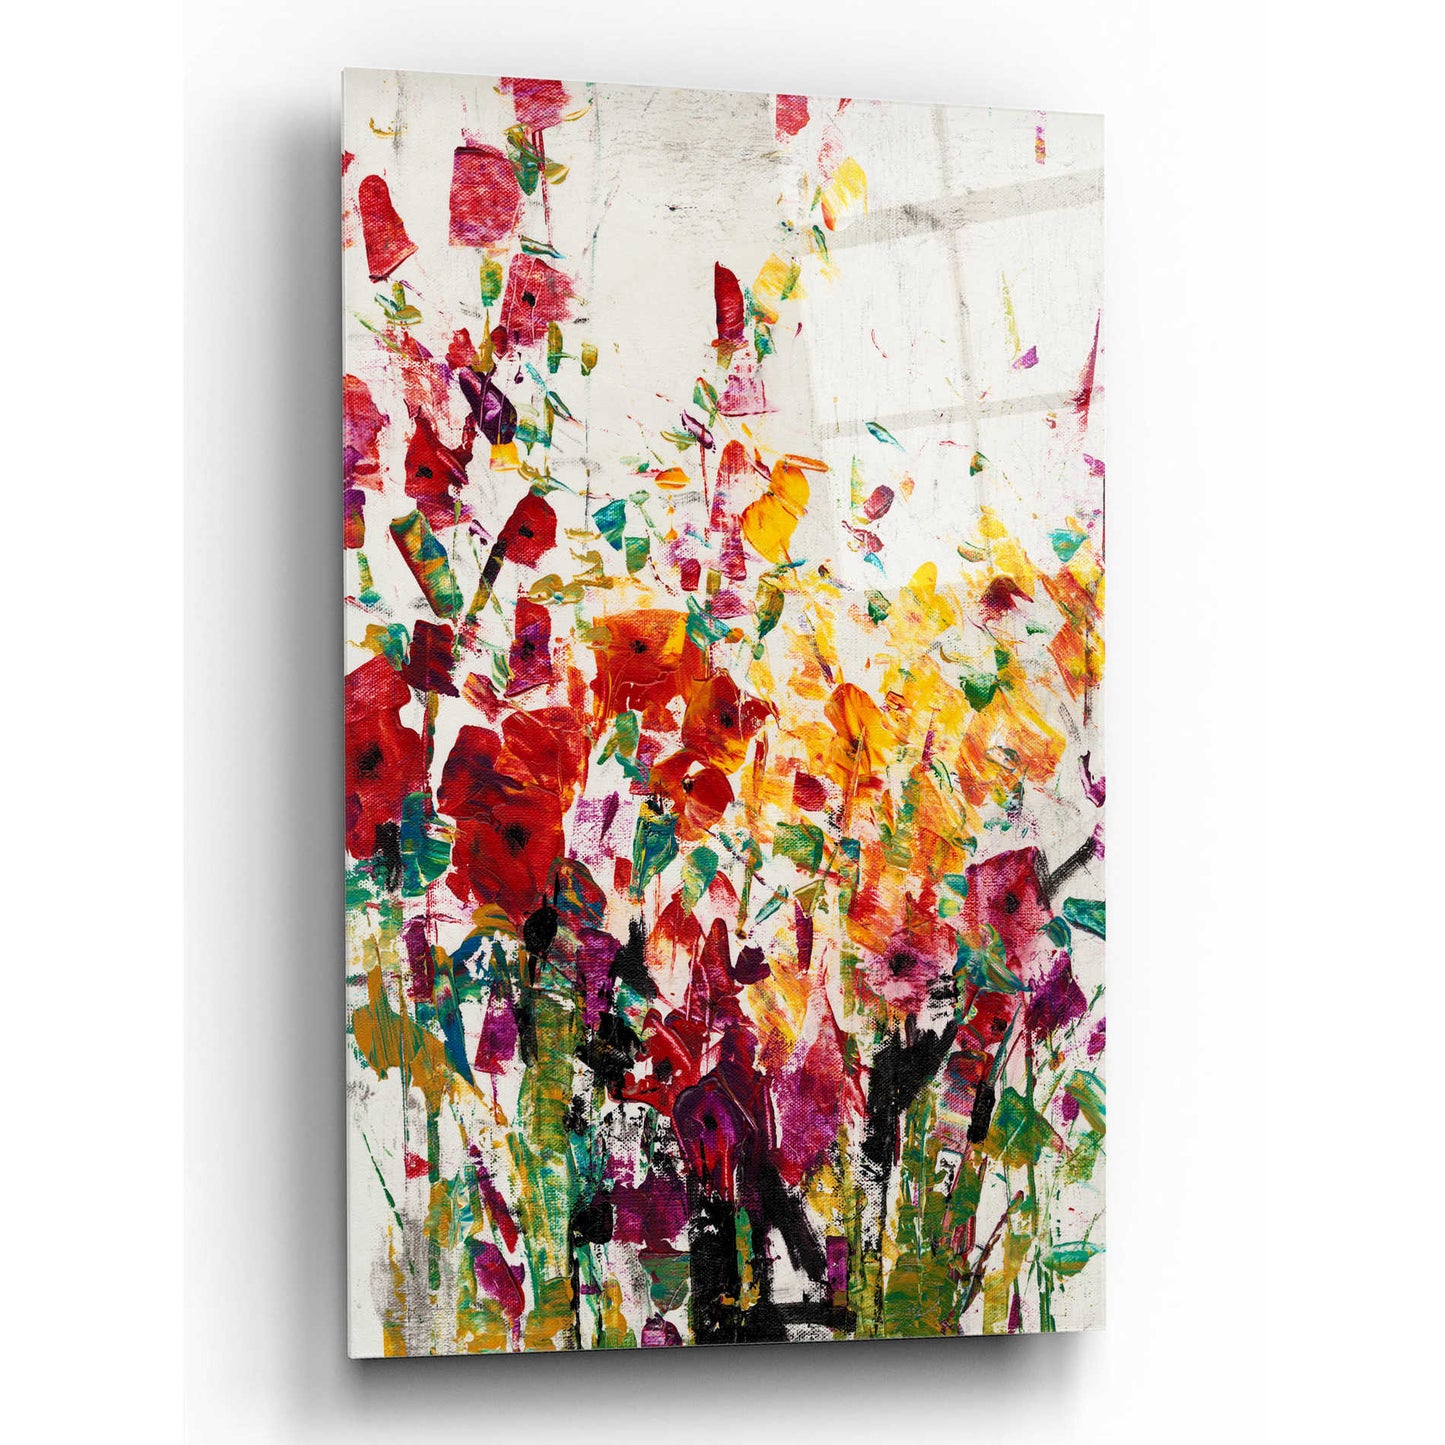 Epic Art 'Wildflowers Blooming I' by Tim O'Toole, Acrylic Glass Wall Art,16x24